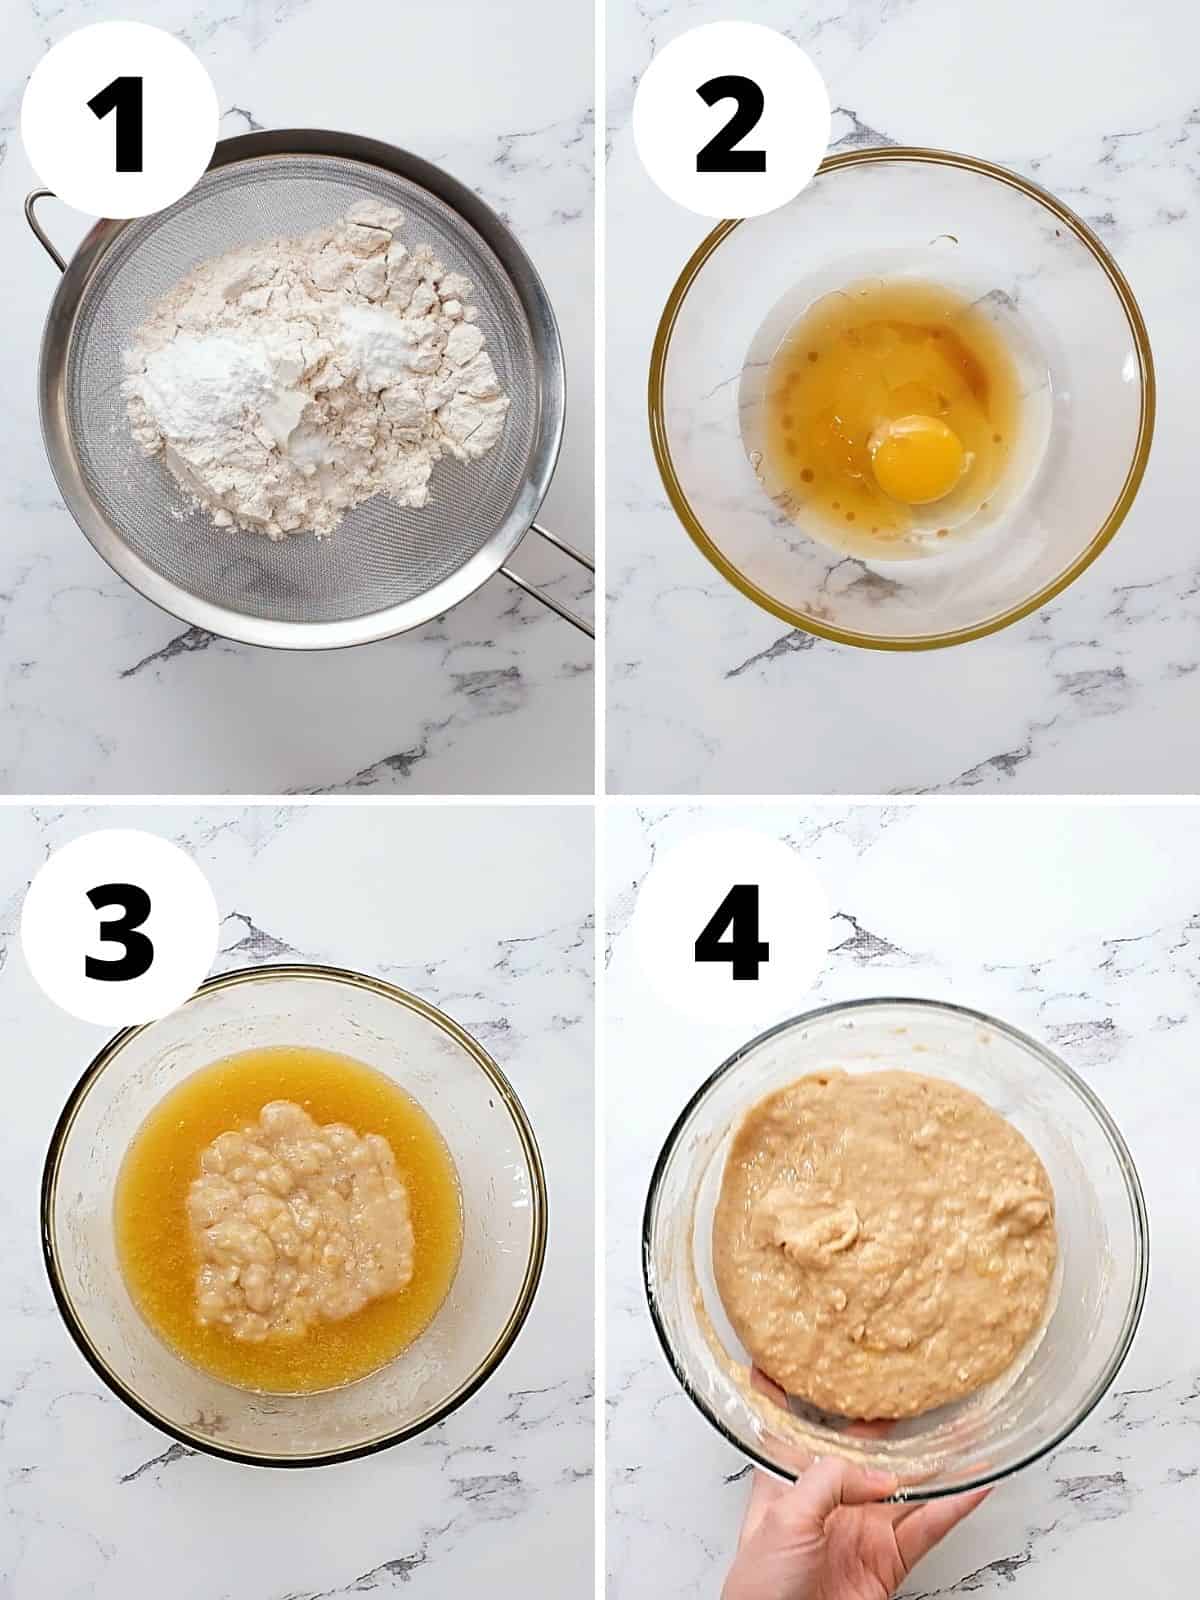 Collage of 4 pictures showing steps to mixing batter: sifting flour, combining egg and honey, adding banana, combining ingredients. 